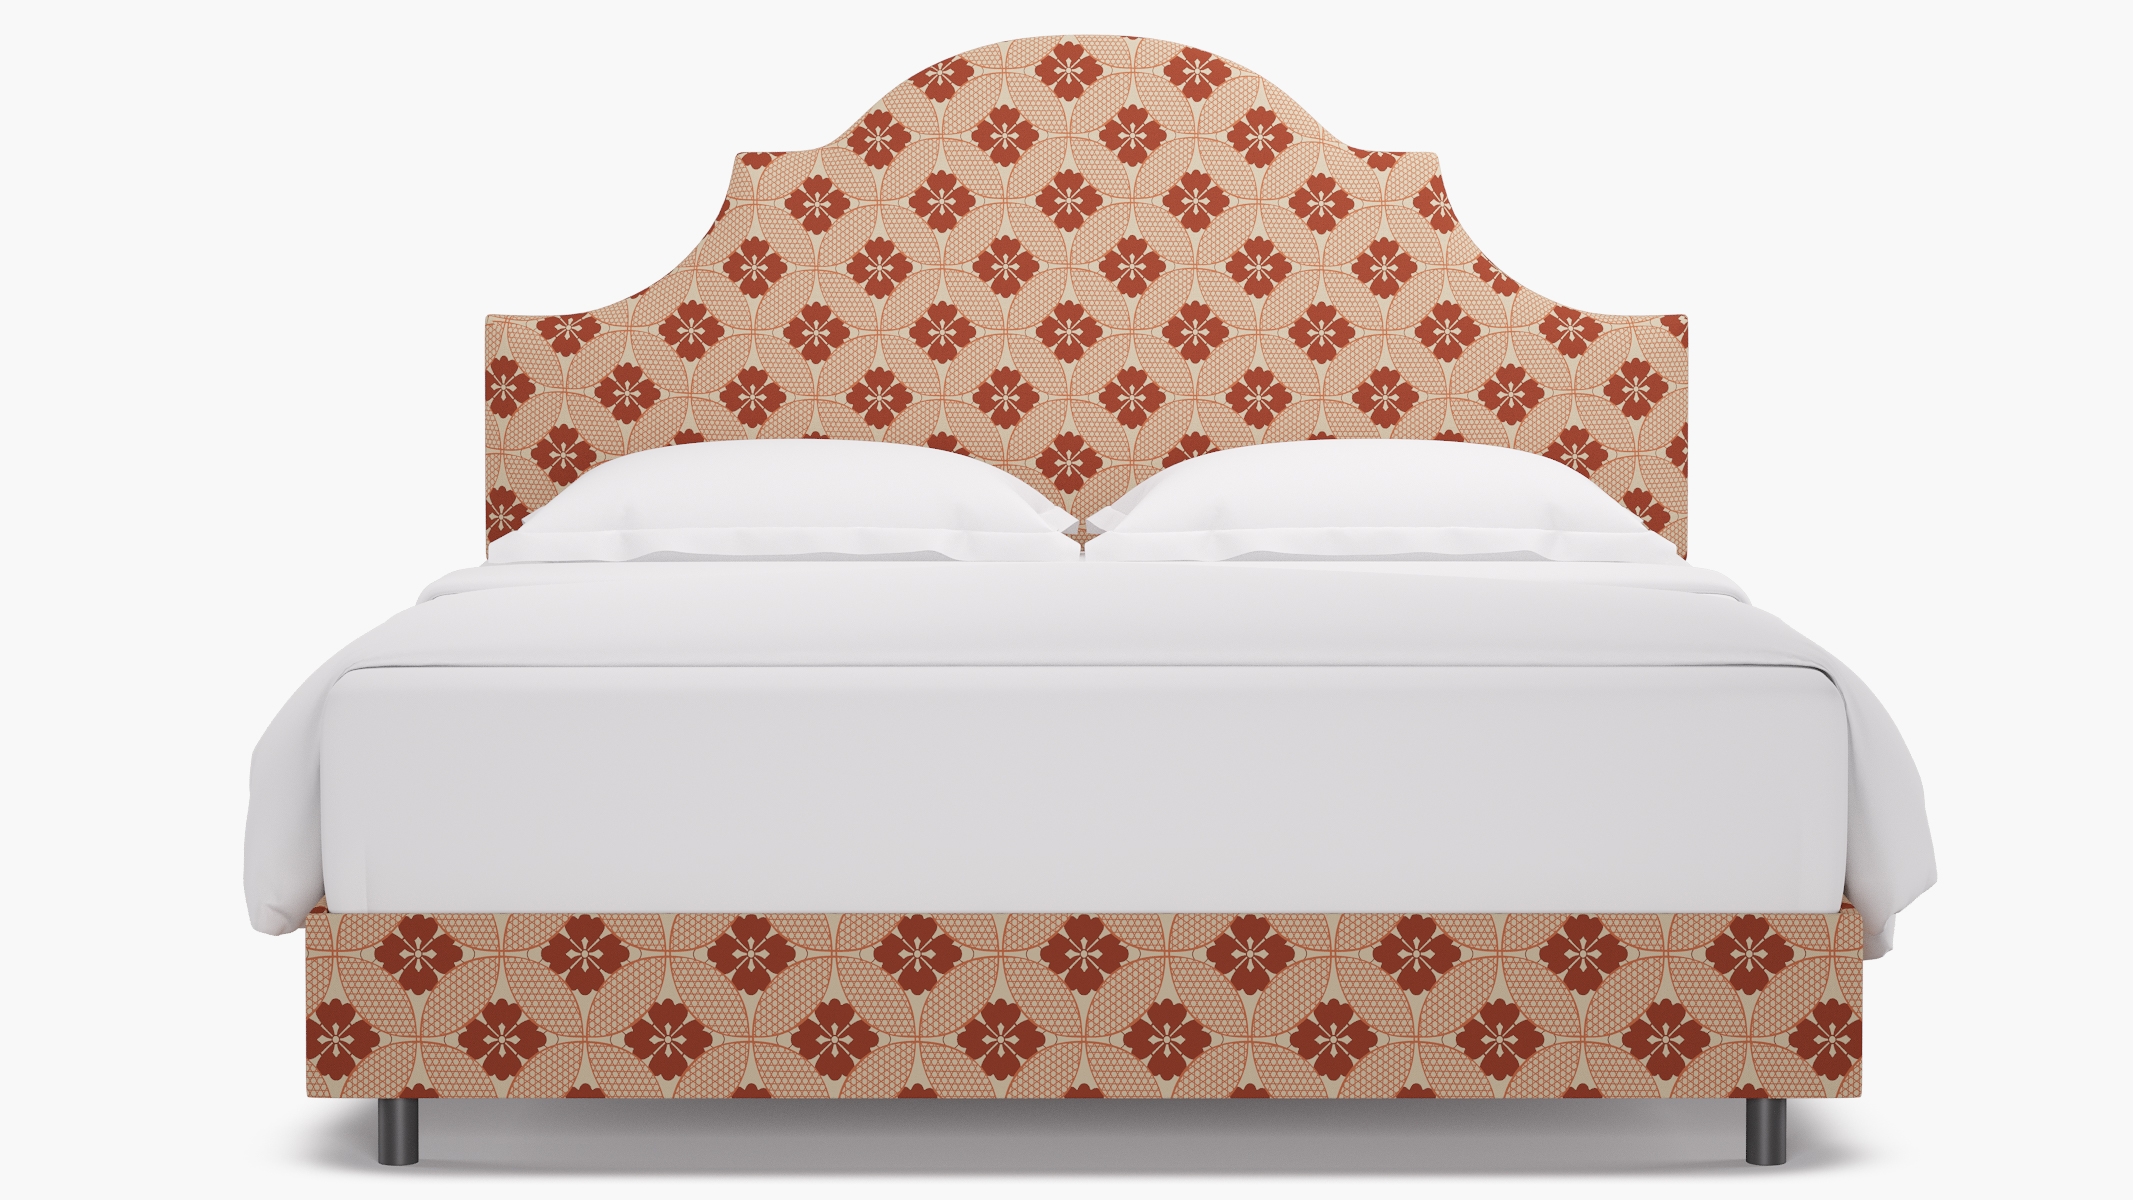 Regency Bed, Coral Solaire, King - Image 1